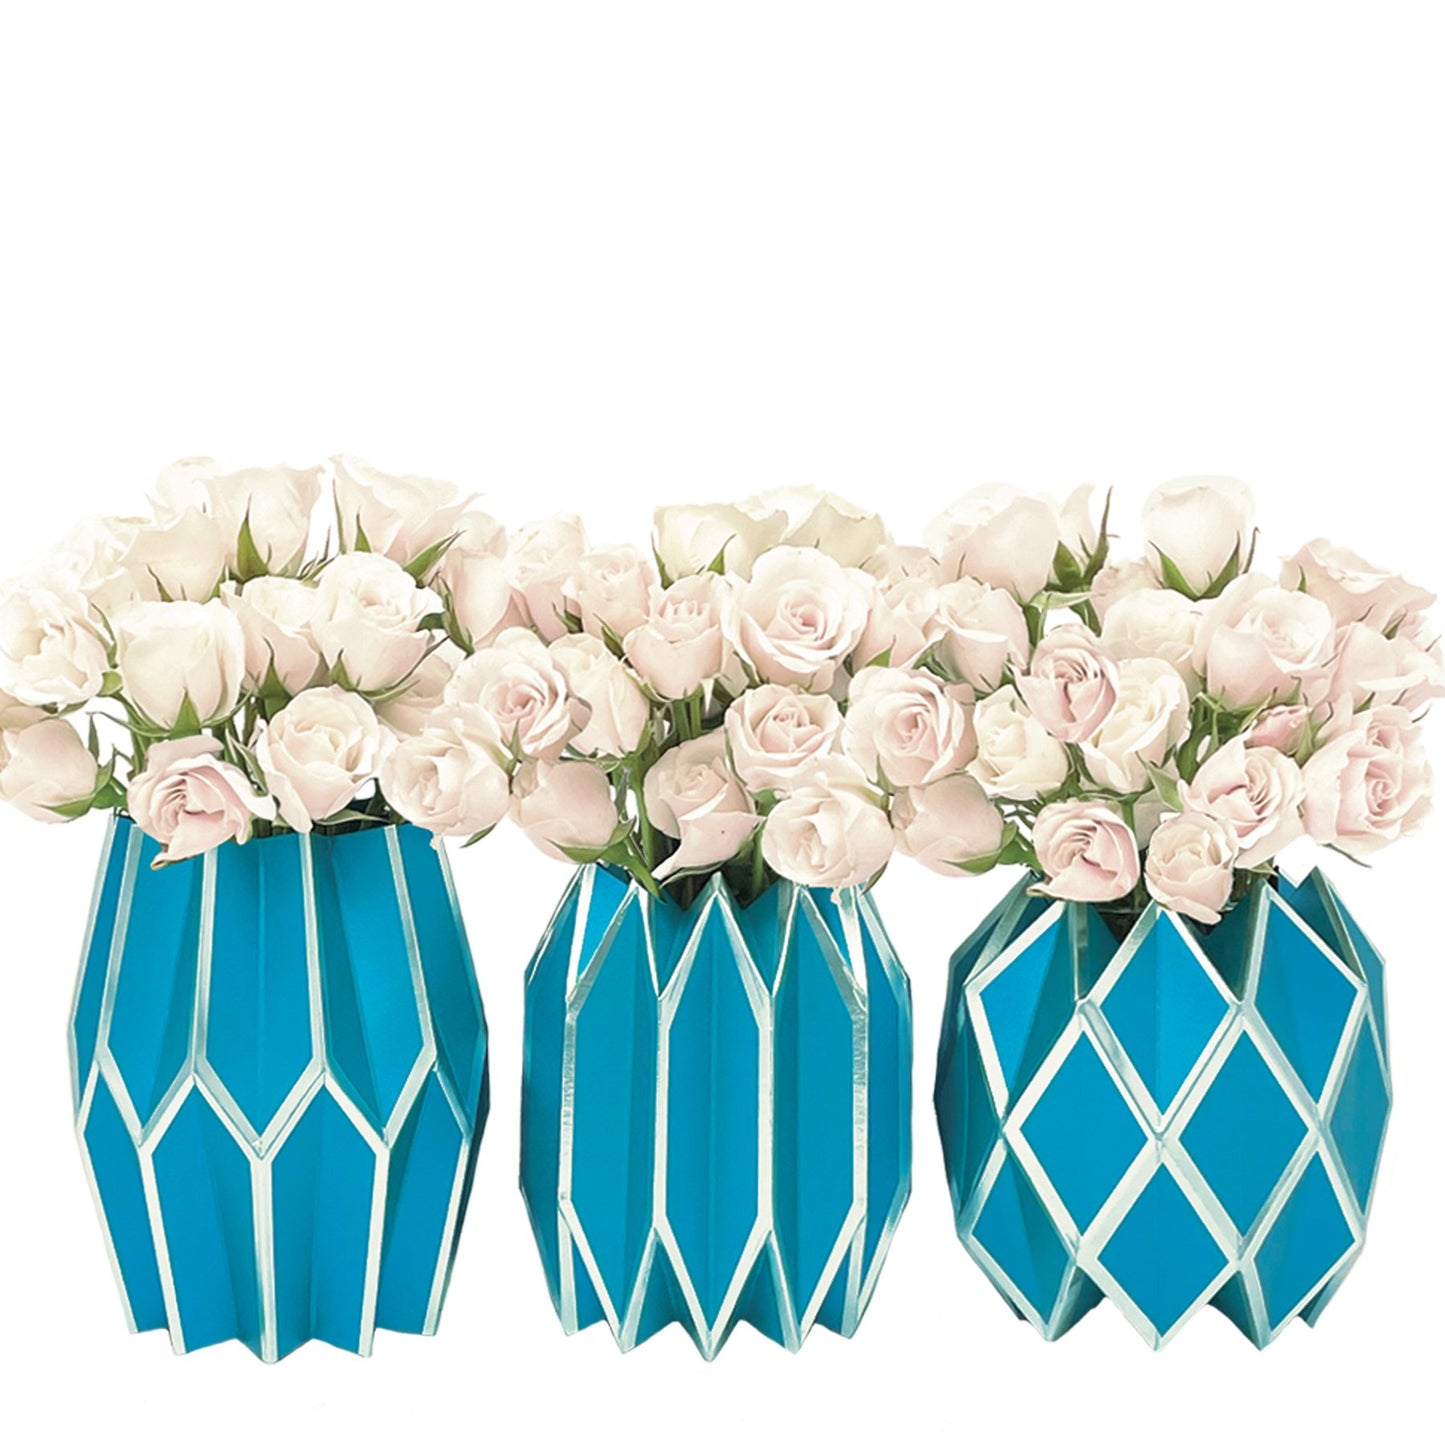 Bright blue paper vases with white roses